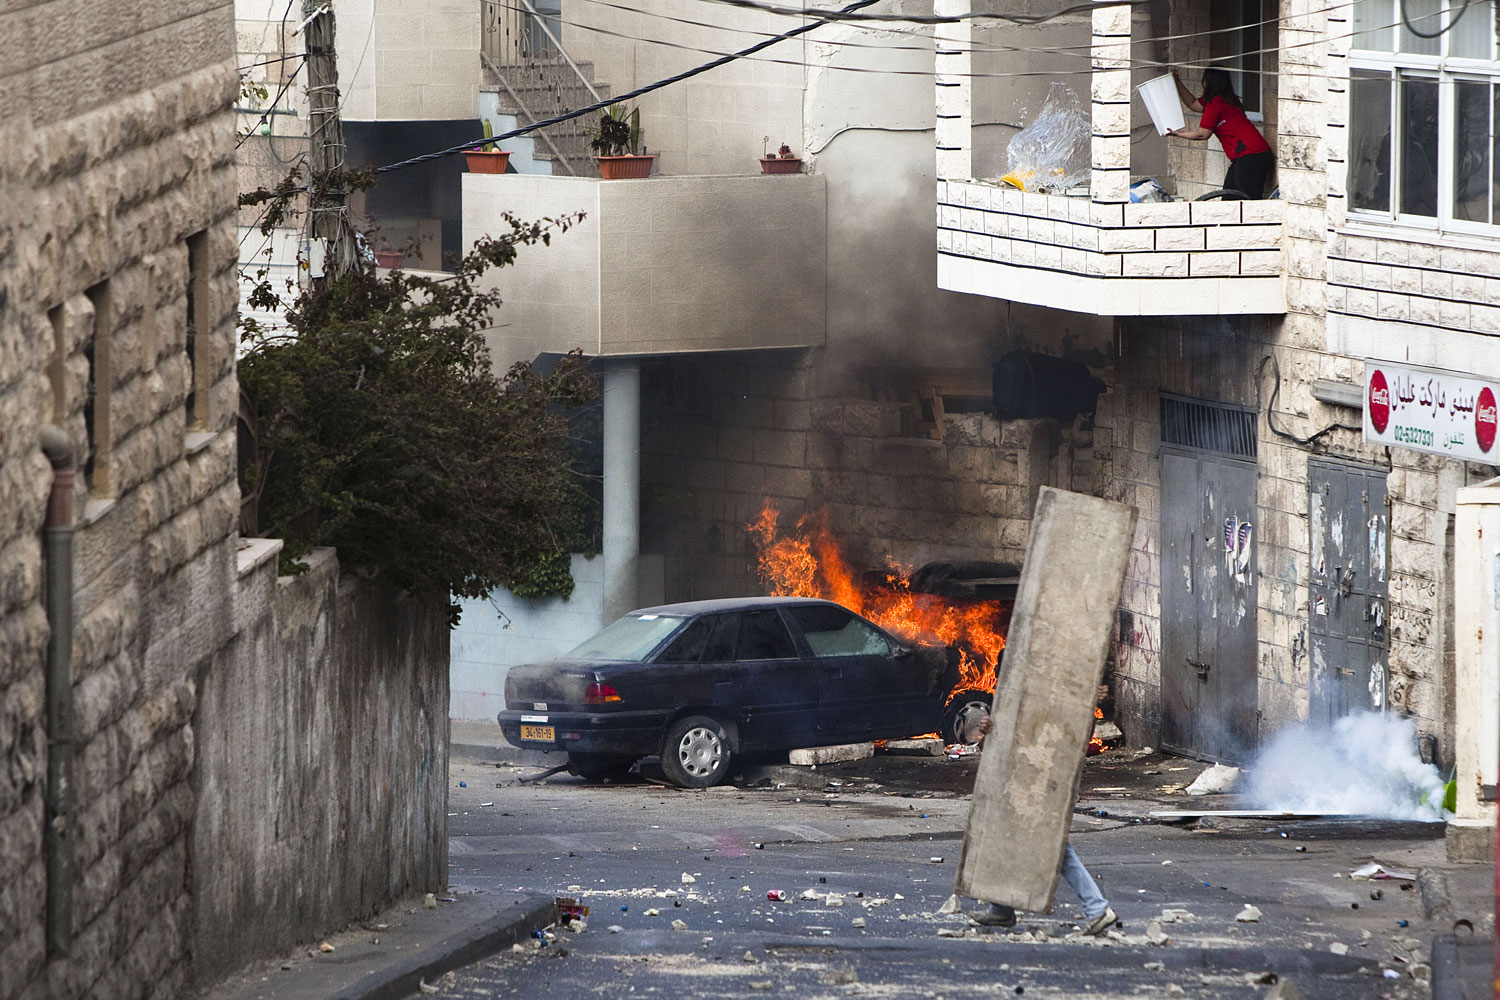 A Palestinian youth takes cover as a woman tries to put out a fire in a burning car in the East Jerusalem neighborhood of Issawiya, Israel, on May 13, 2011.